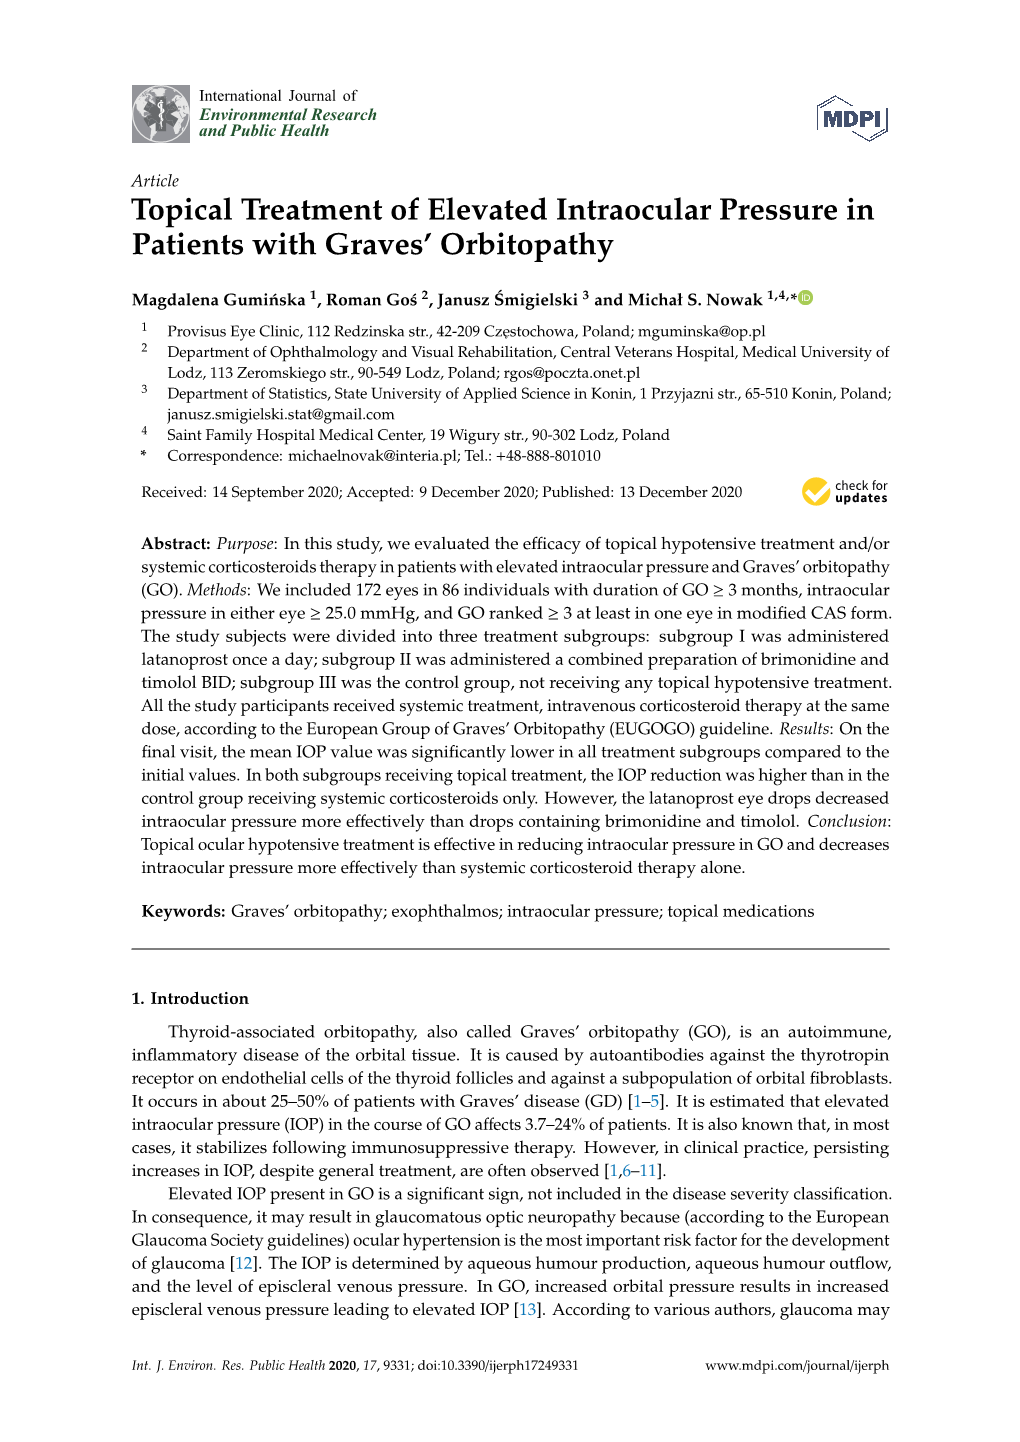 Topical Treatment of Elevated Intraocular Pressure in Patients with Graves’ Orbitopathy